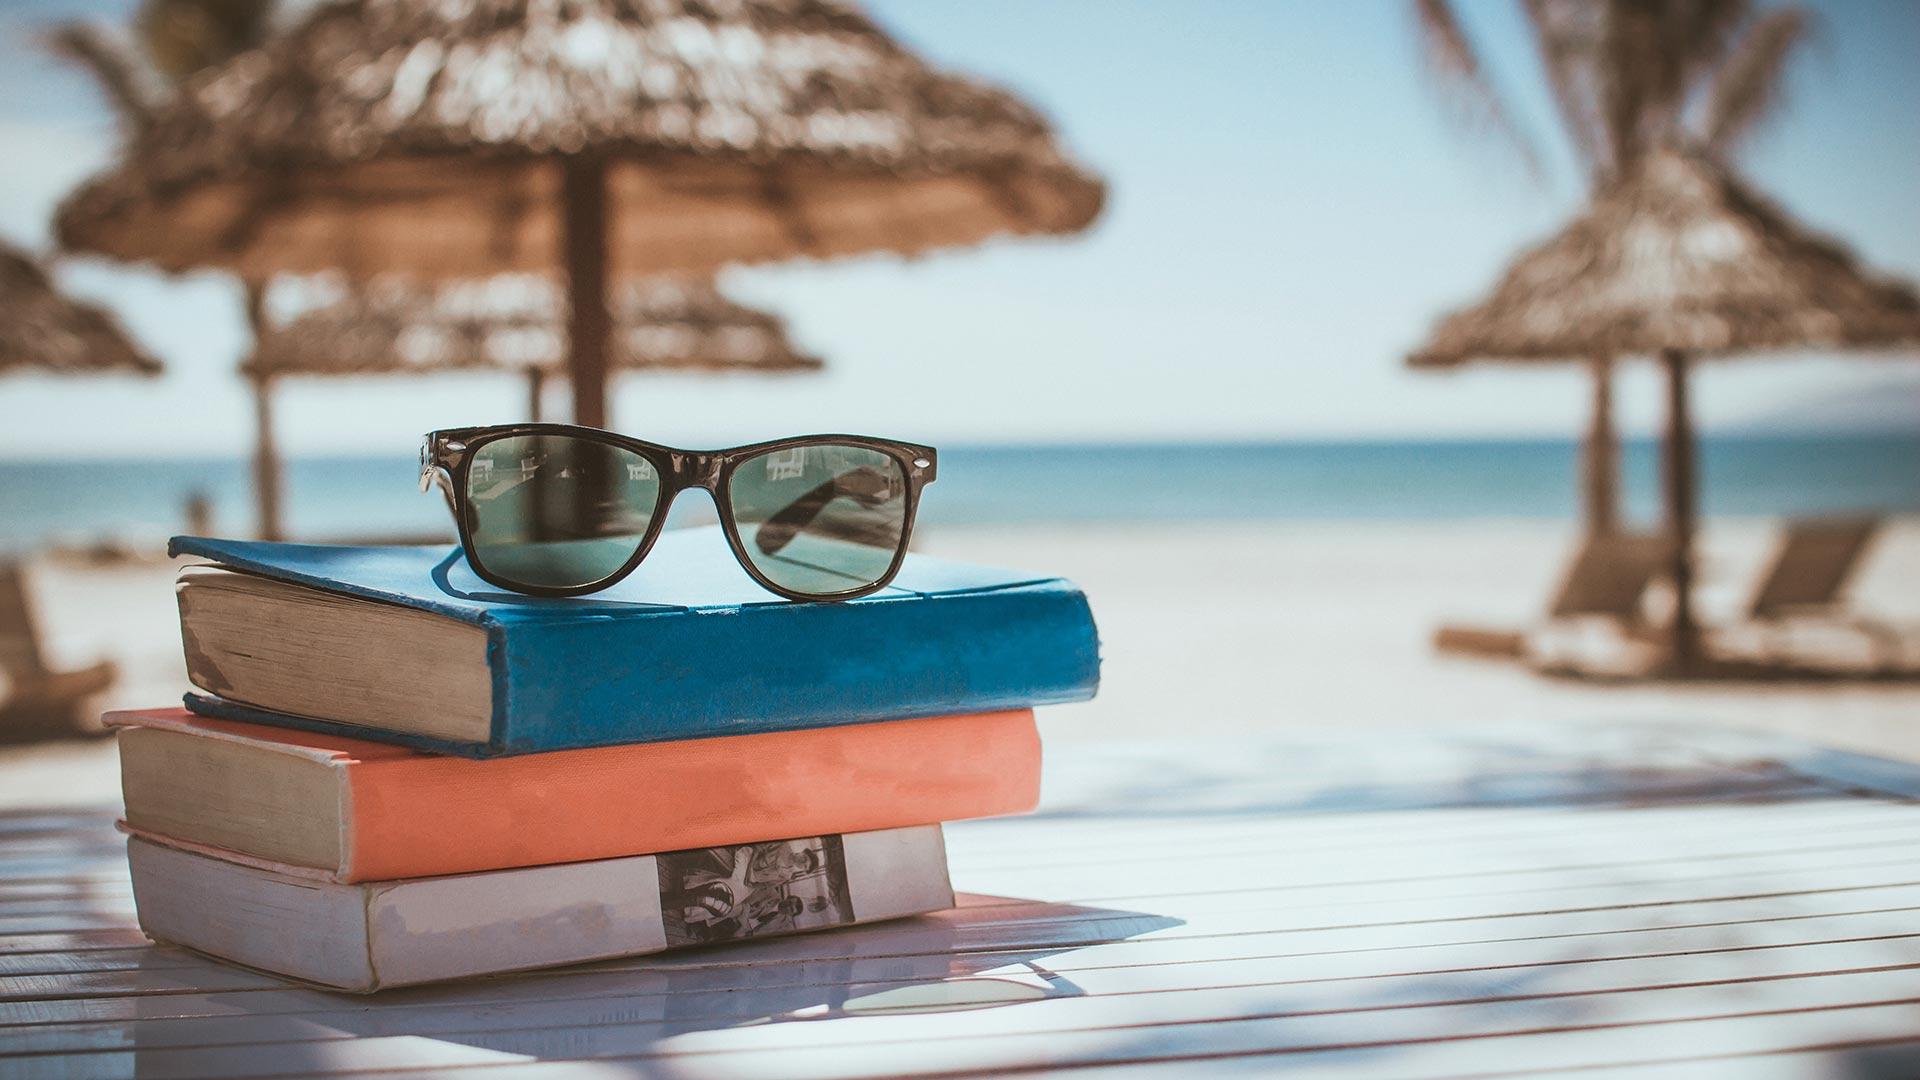 UMD faculty, staff and students offered up their ideas for books to bring on your last-minute beach trip. Photo by Shutterstock.